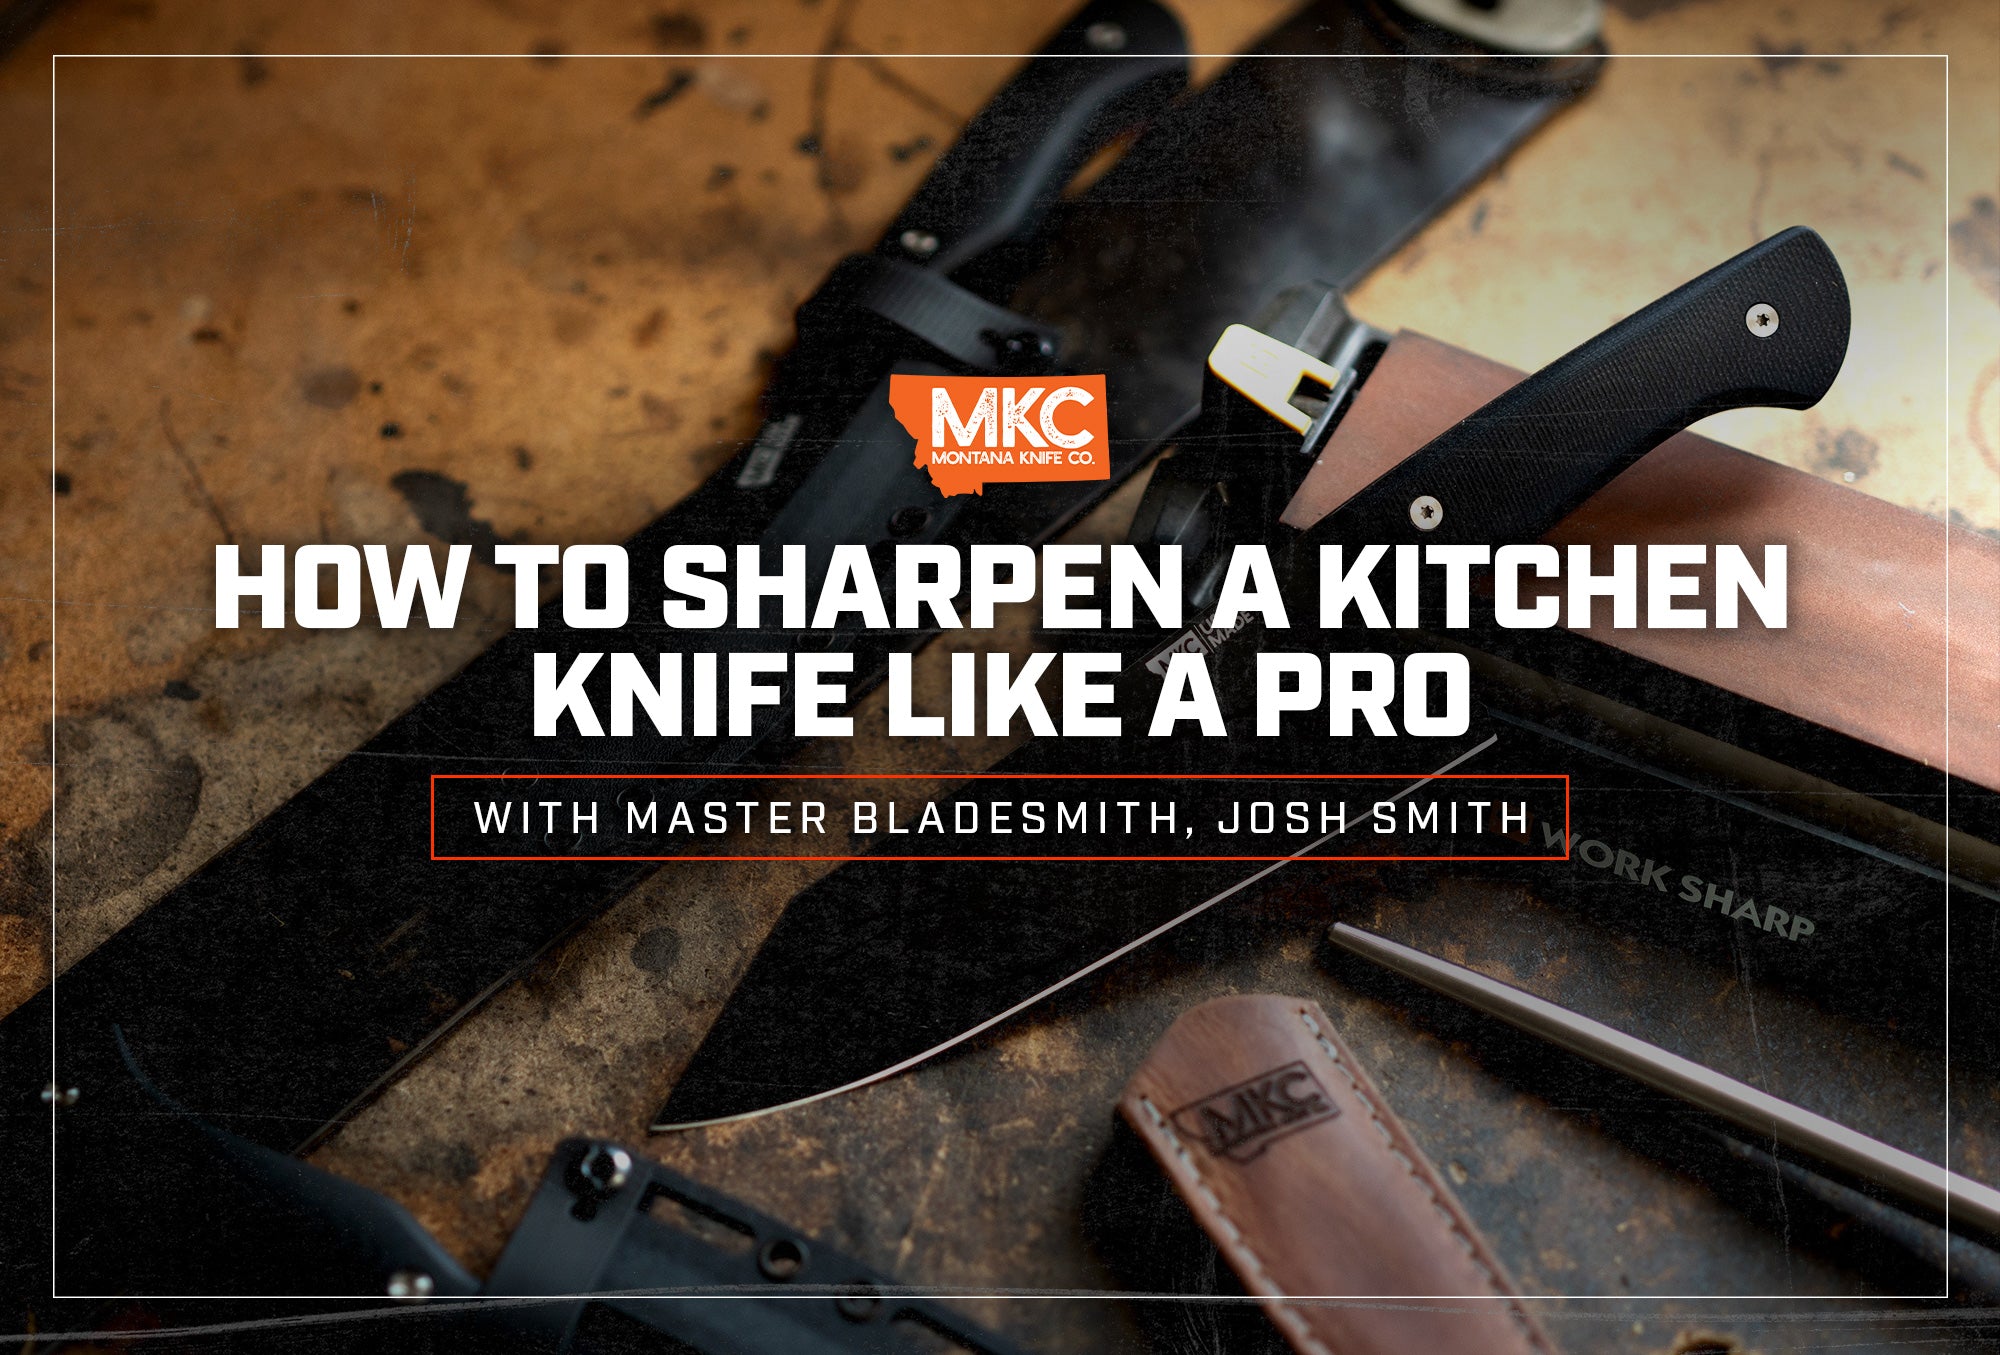 How do most people sharpen their kitchen knives? Do they use